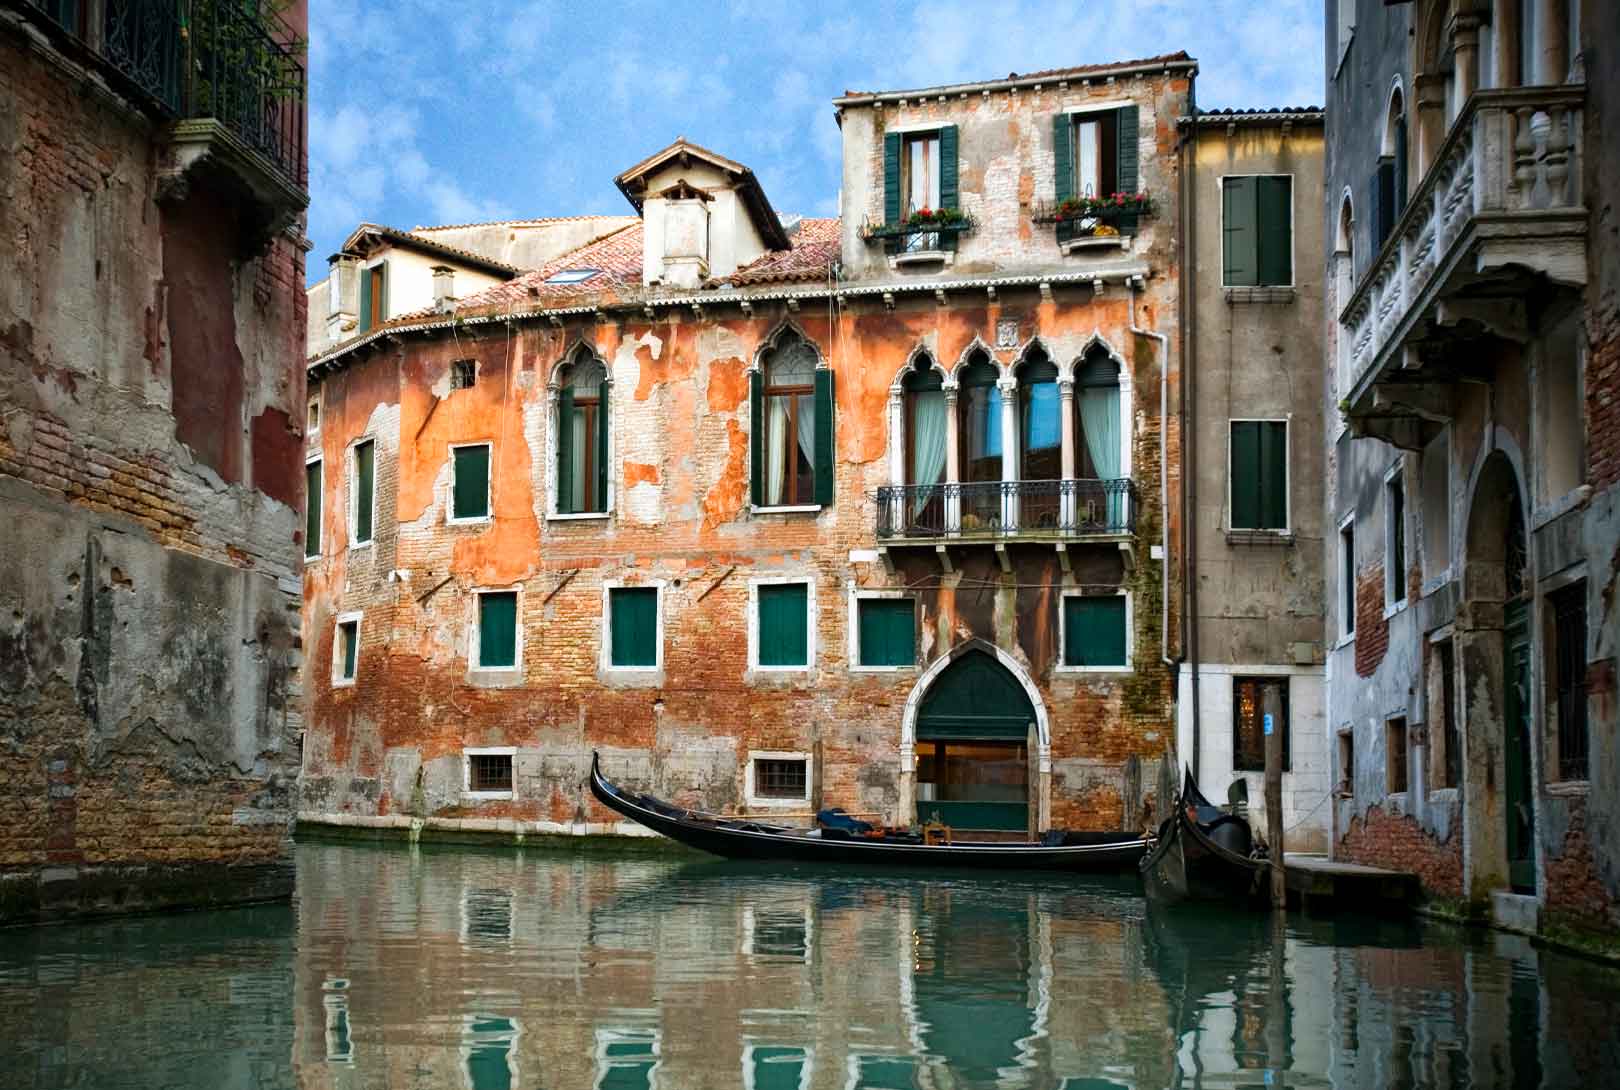 two Venetian gondolas tied outside stone buildings of different terracotta hues along a canal